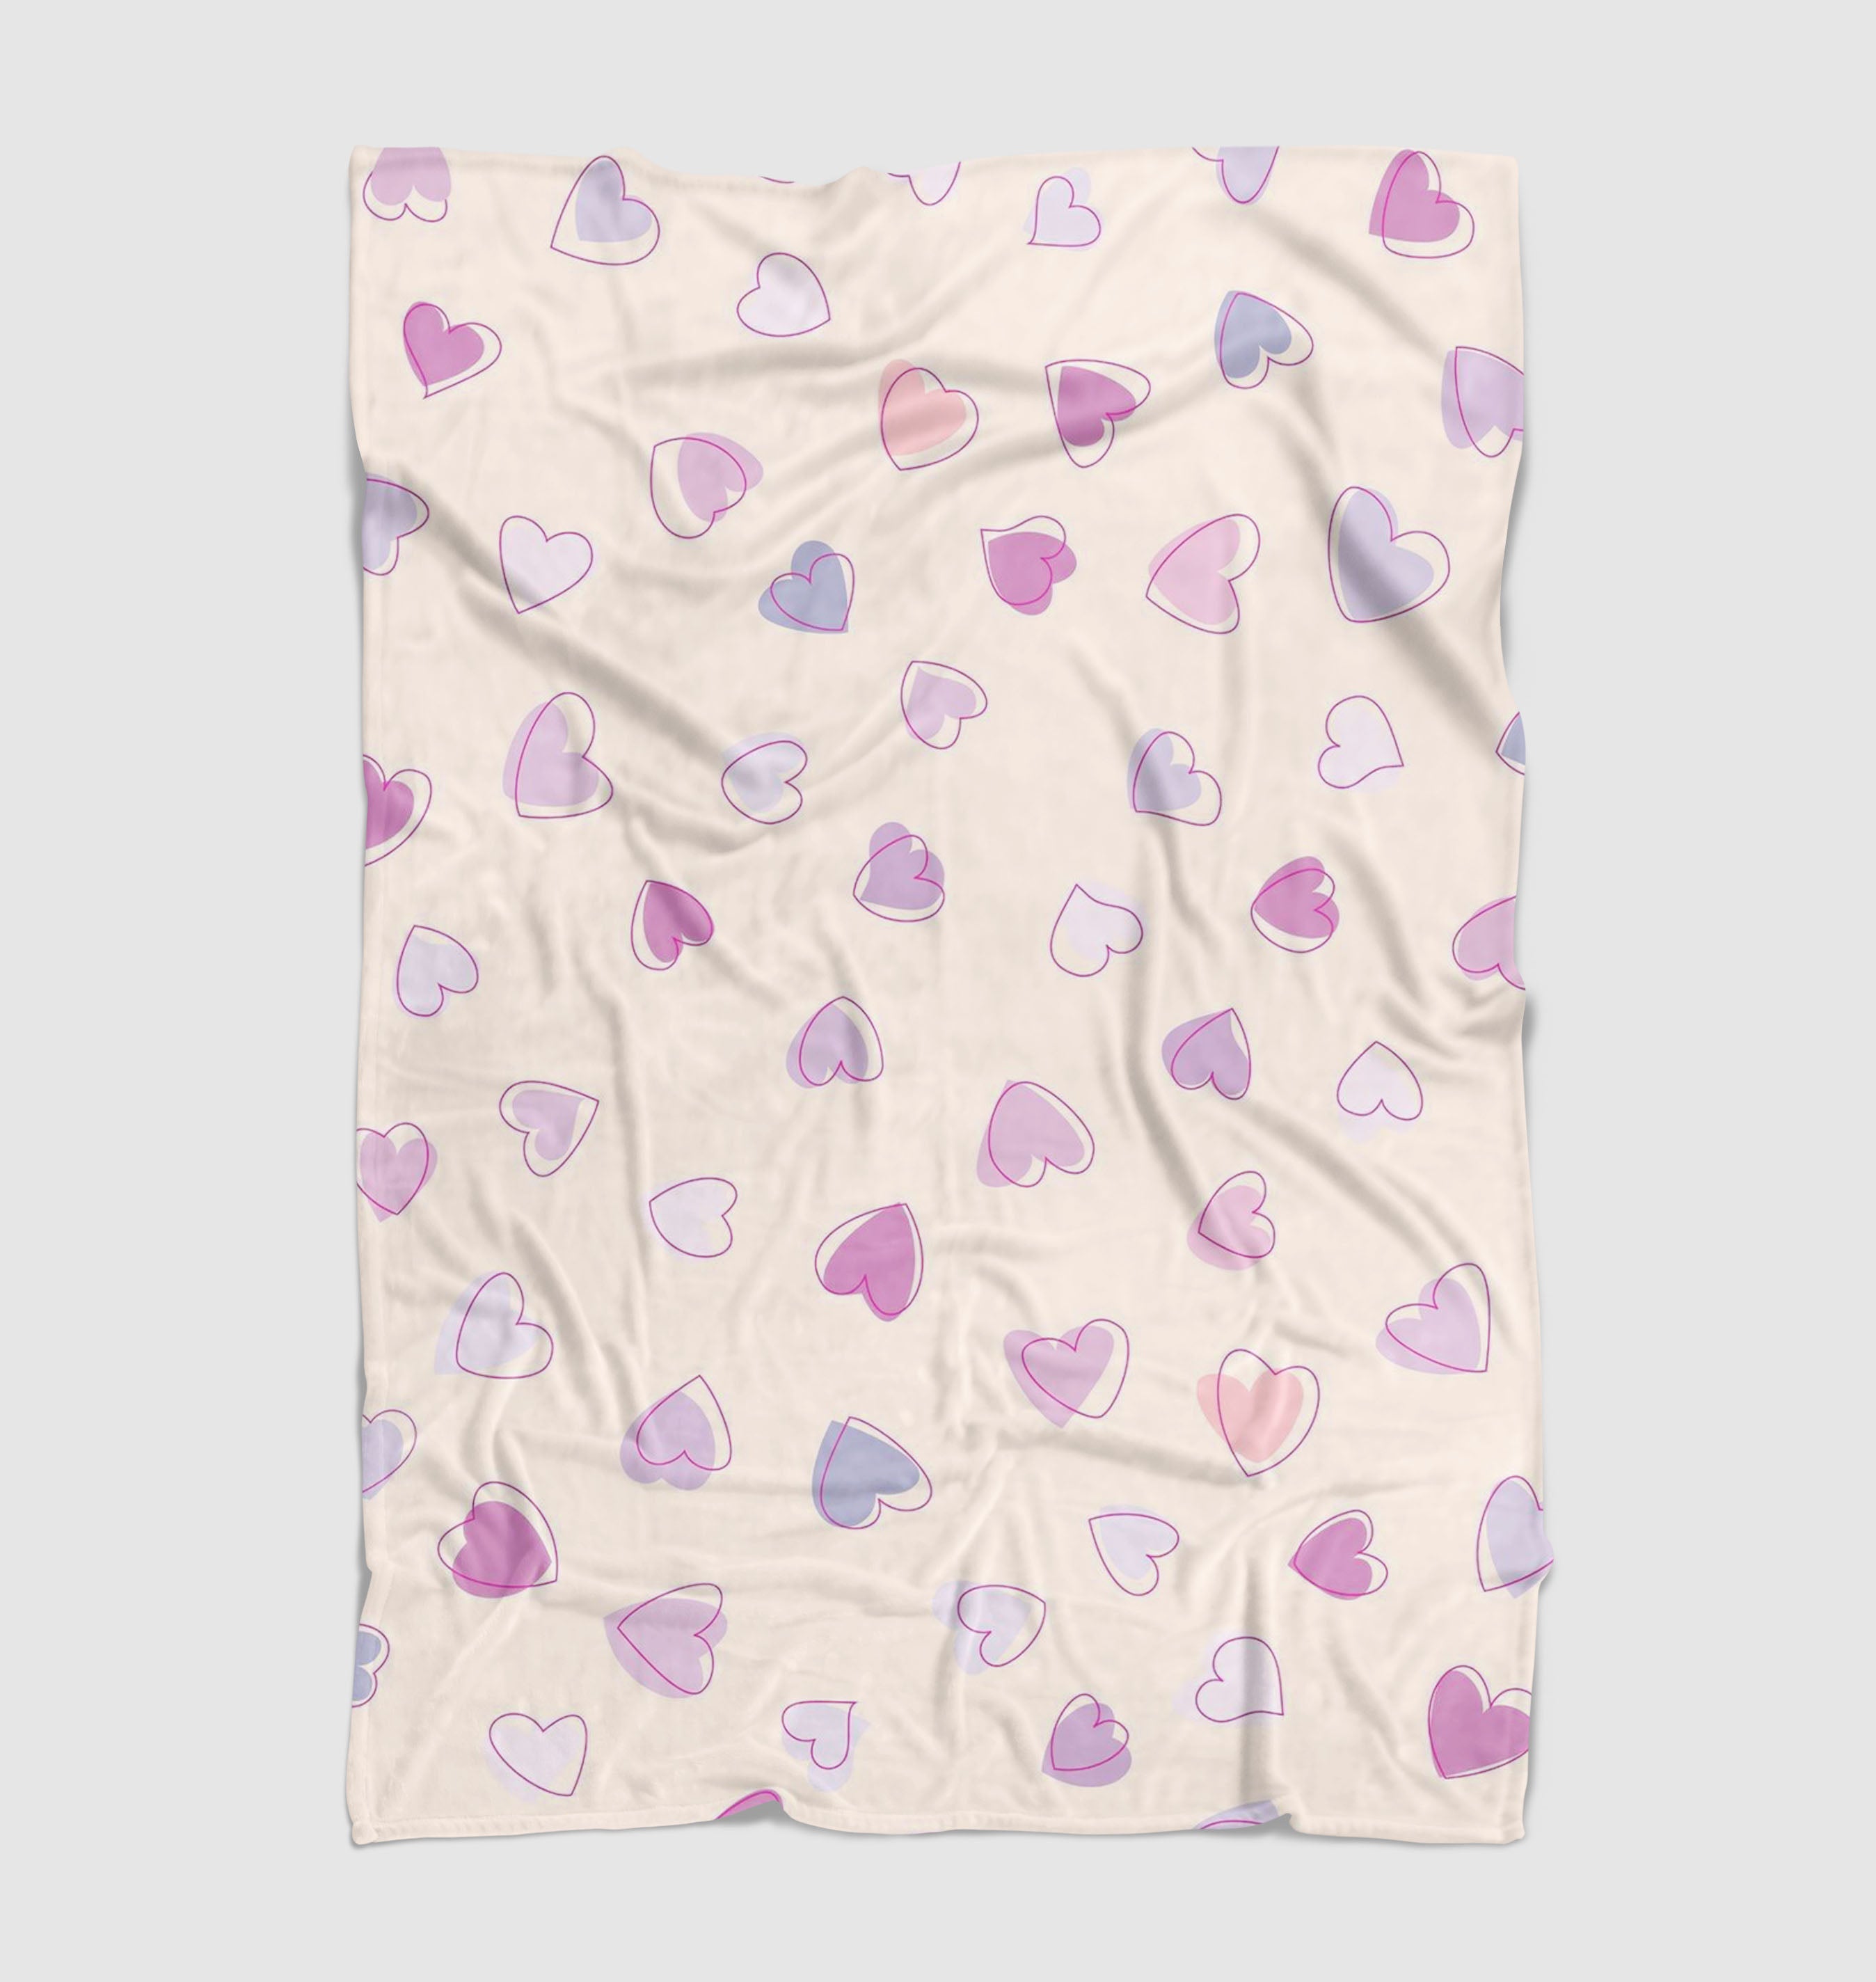 stroke and solid of hearts Ultra soft fleece blanket